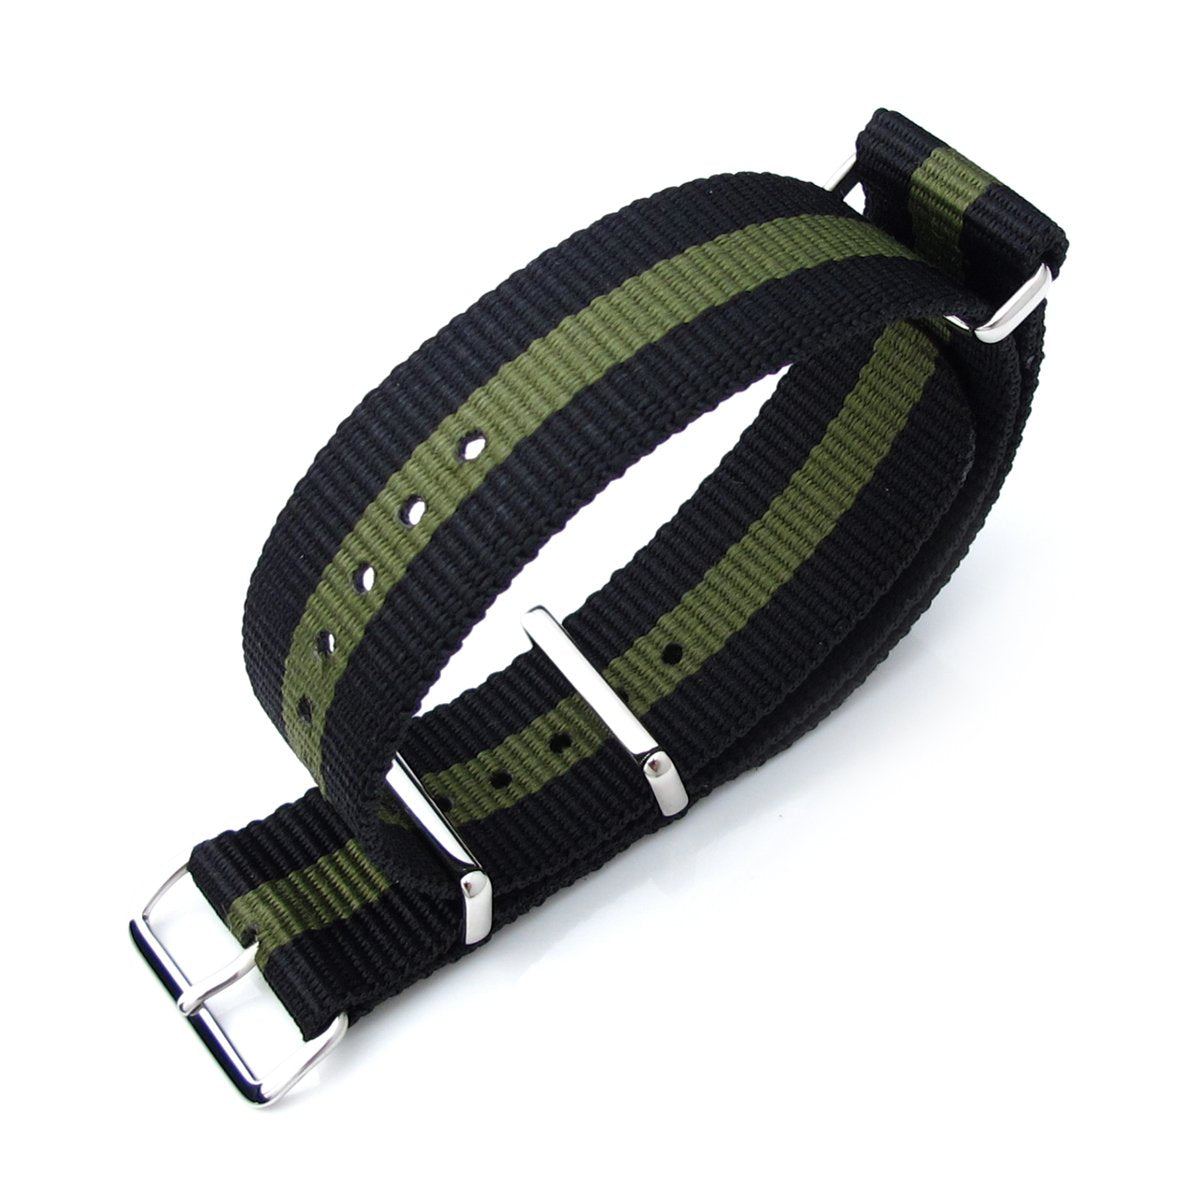 MiLTAT 20mm 21mm or 22mm G10 NATO Military Watch Strap Ballistic Nylon Armband Polished Black &amp; Military Green Strapcode Watch Bands